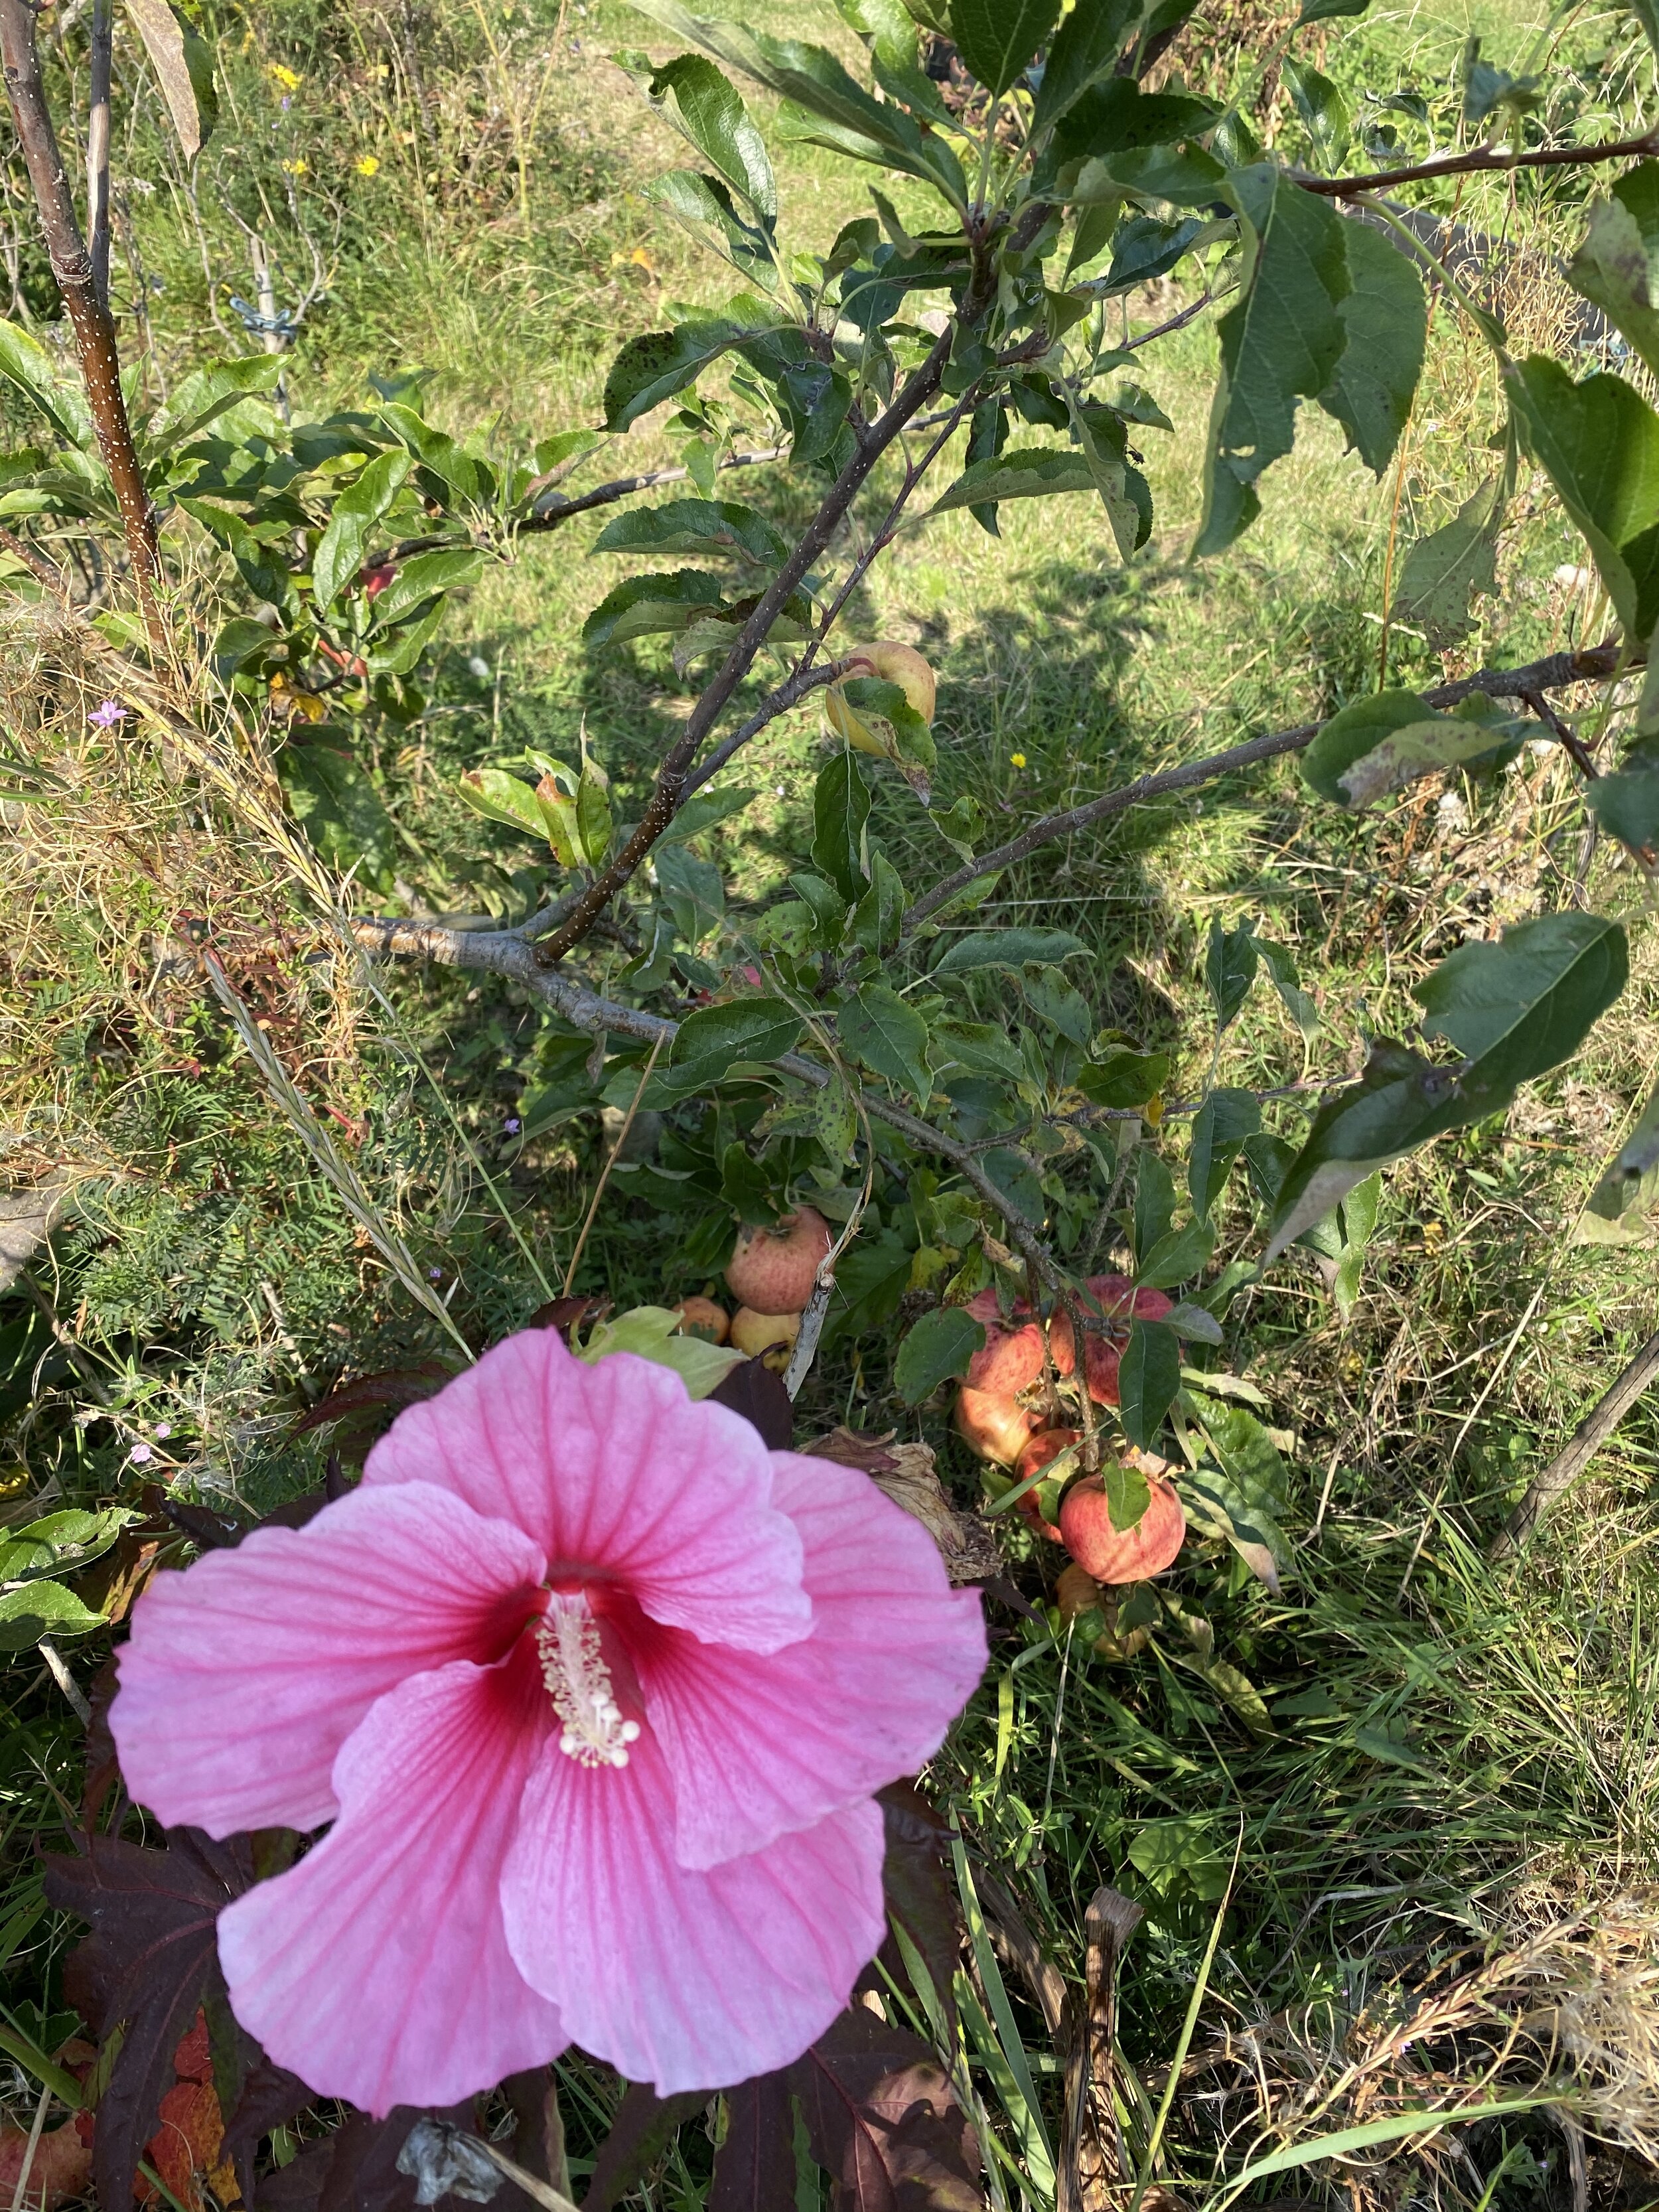 Pink Hibiscus moscheutus flower. The plant lives near a dwarf apple tree